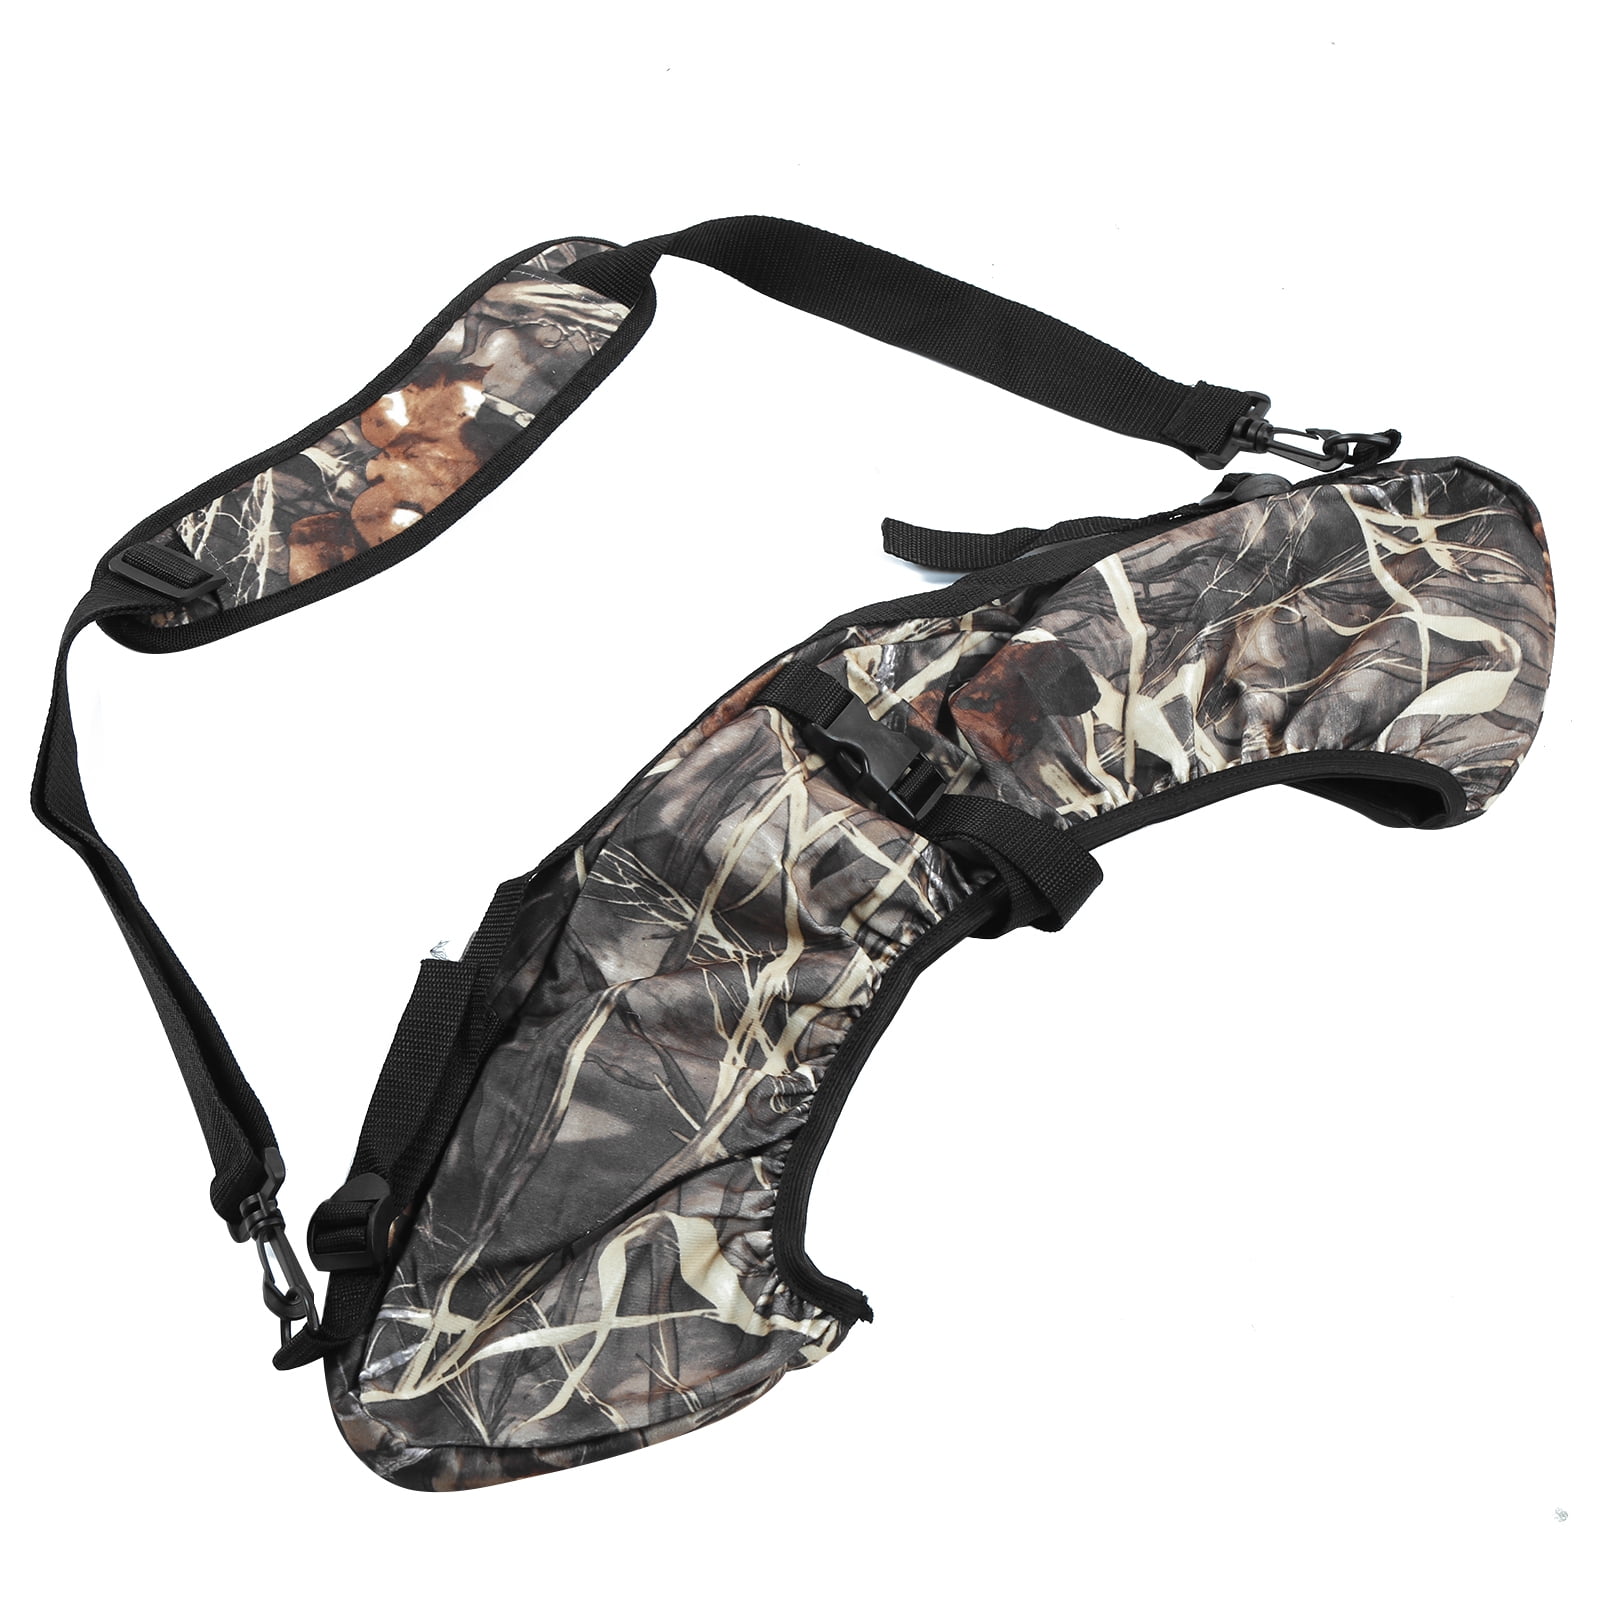 1 X Camouflage Archery Bow Bag Outdoors Hunting Bow Sling Carrying Bag Accessory 